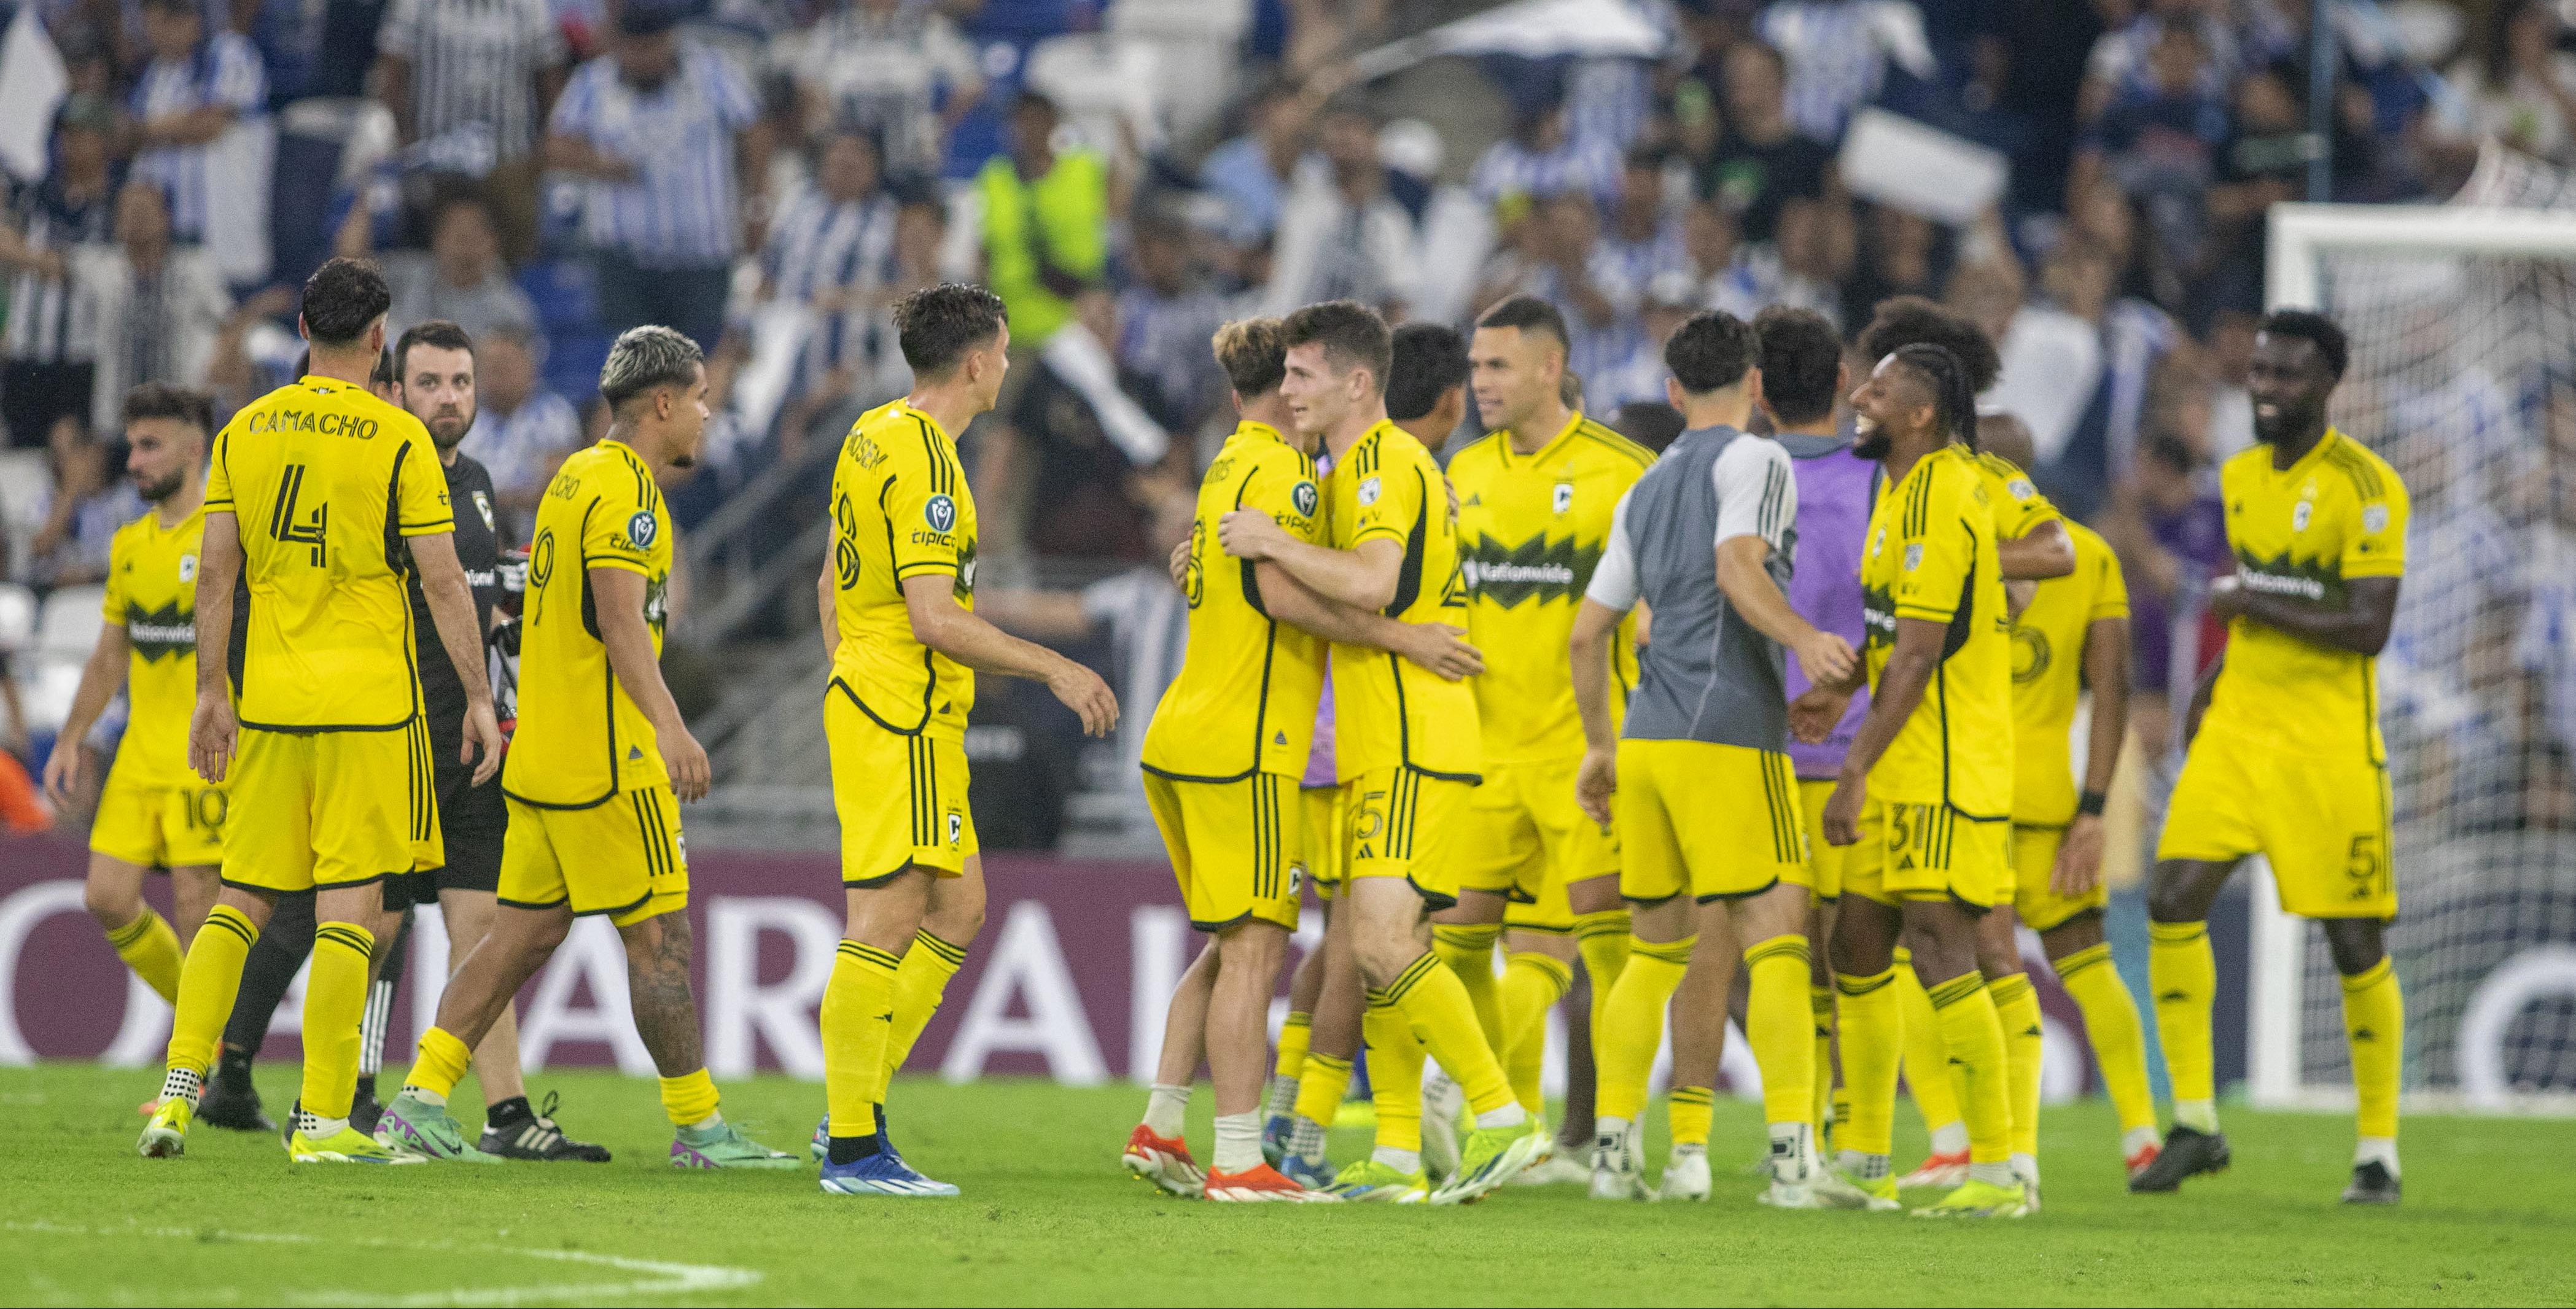 Columbus Crew, Pachuca to face off in 2024 Concacaf Champions Cup
Final